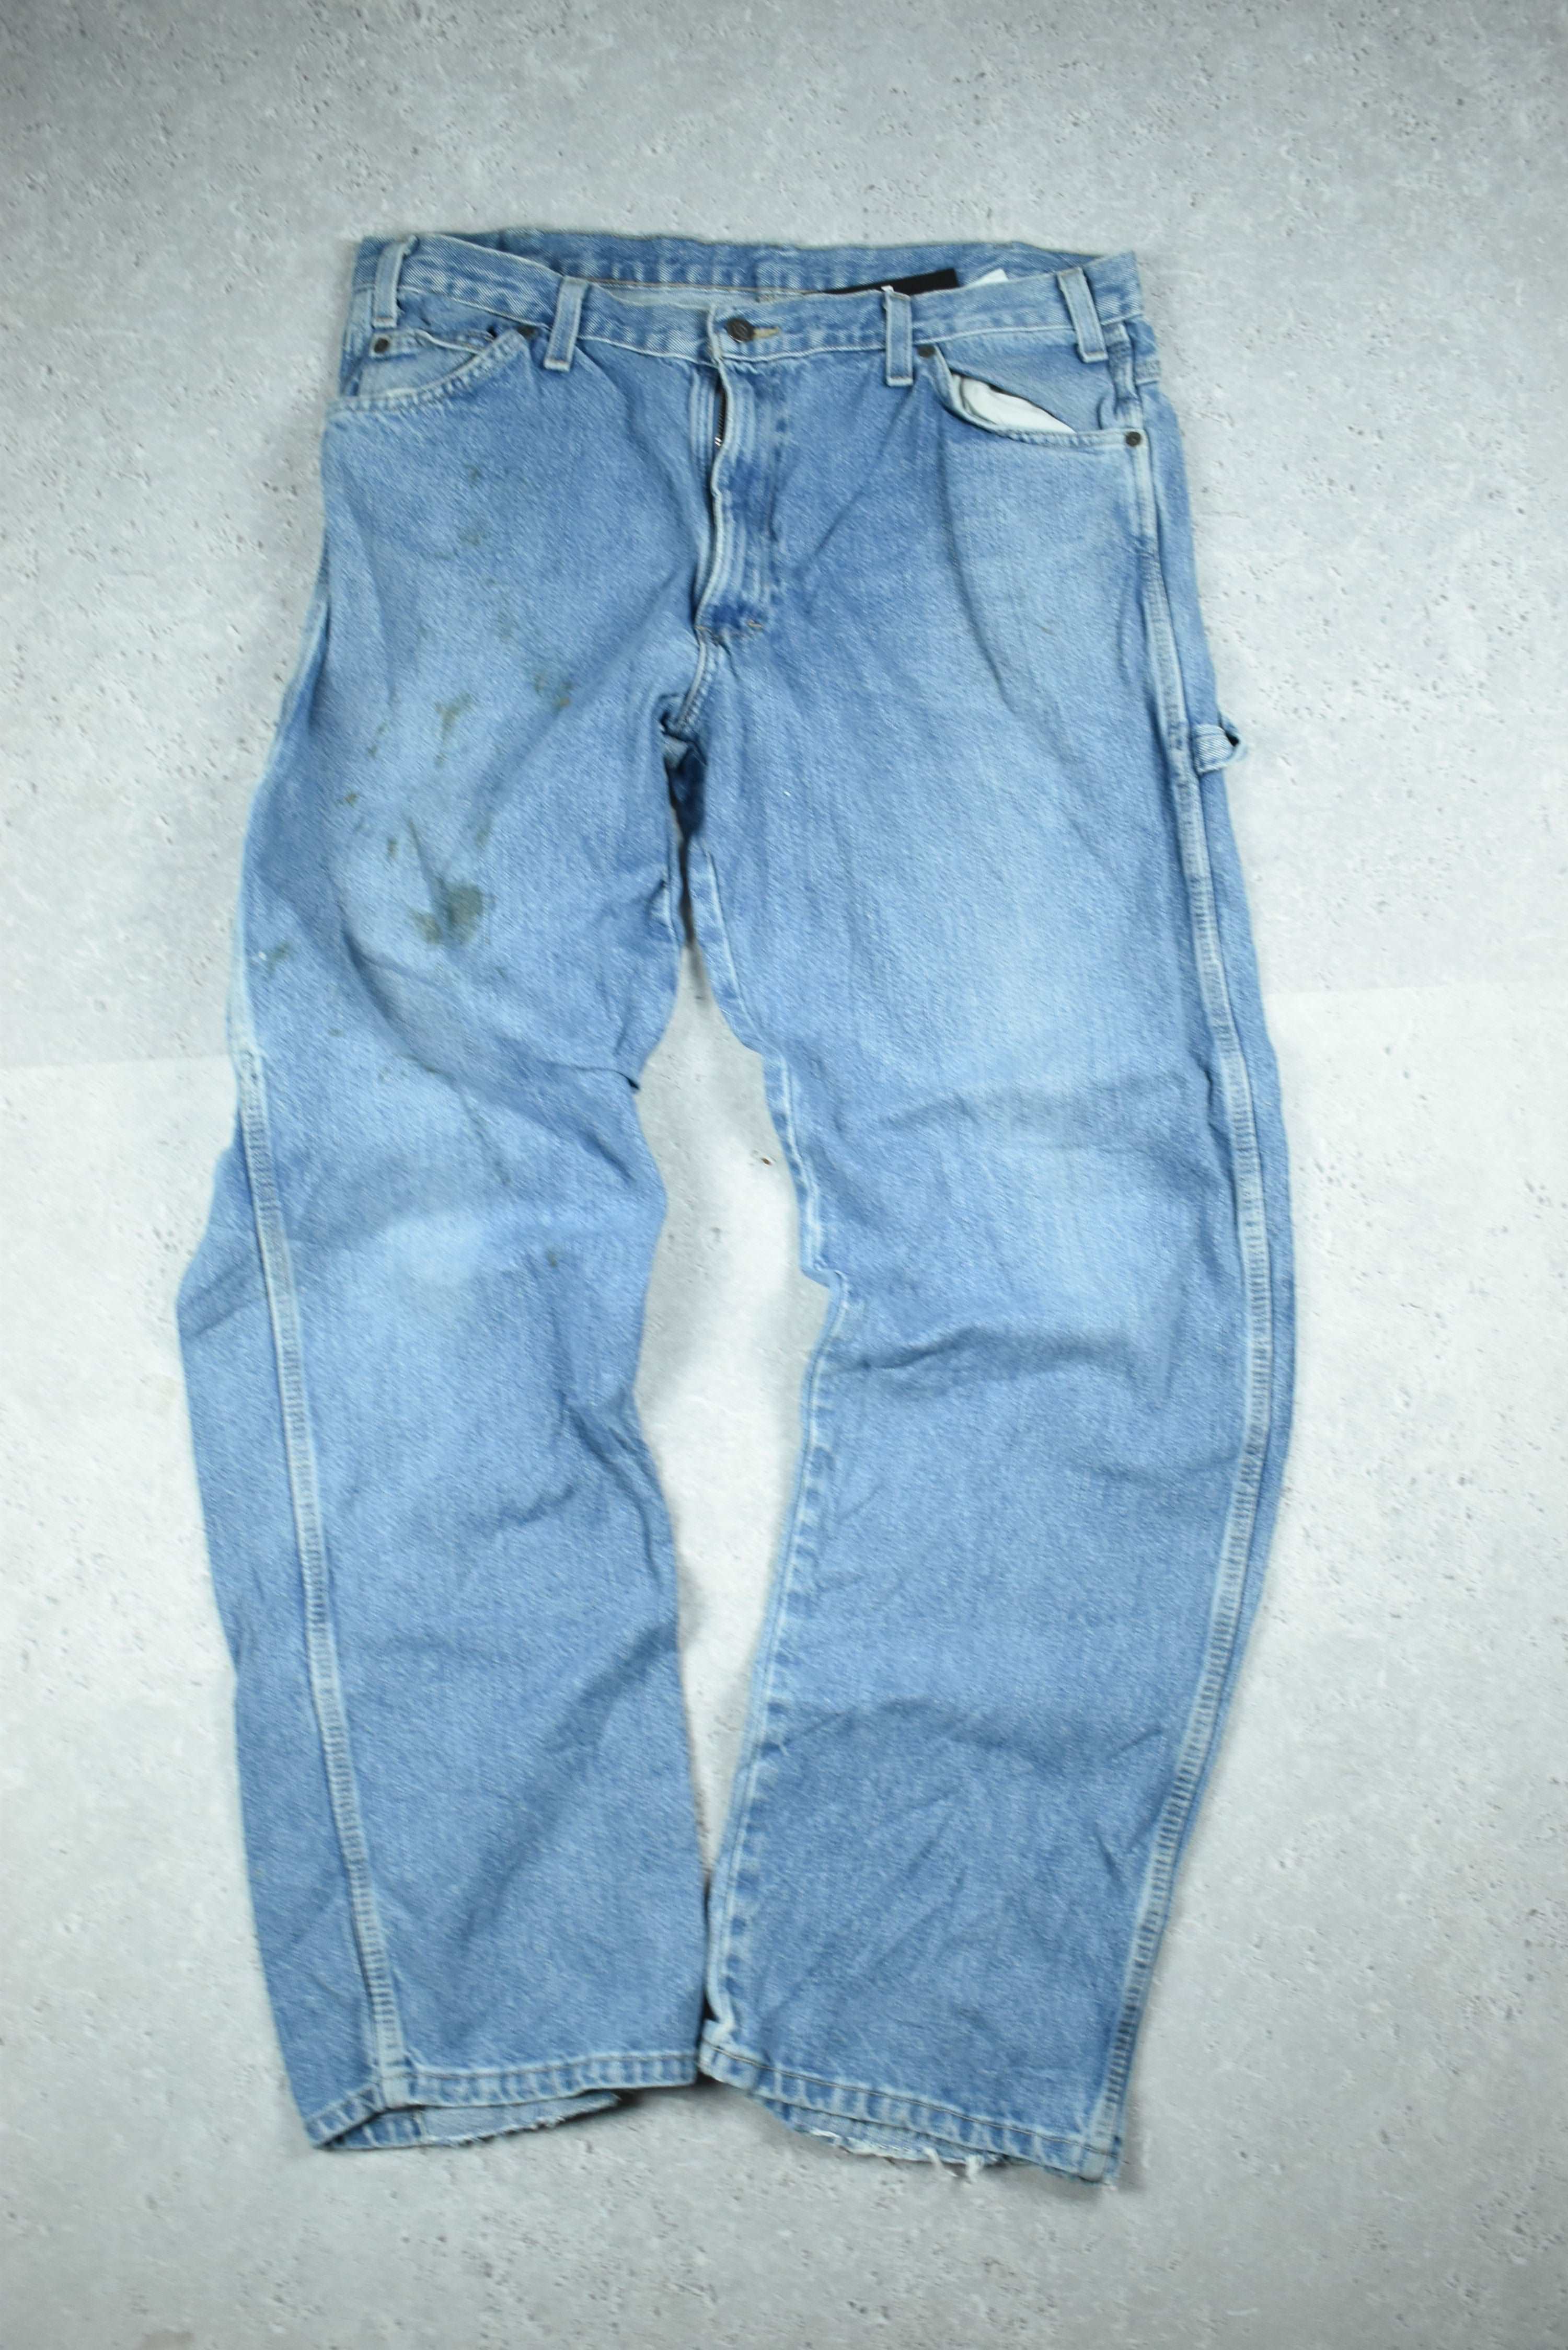 Vintage Dickies Relaxed Fit Denim Jeans 36x32